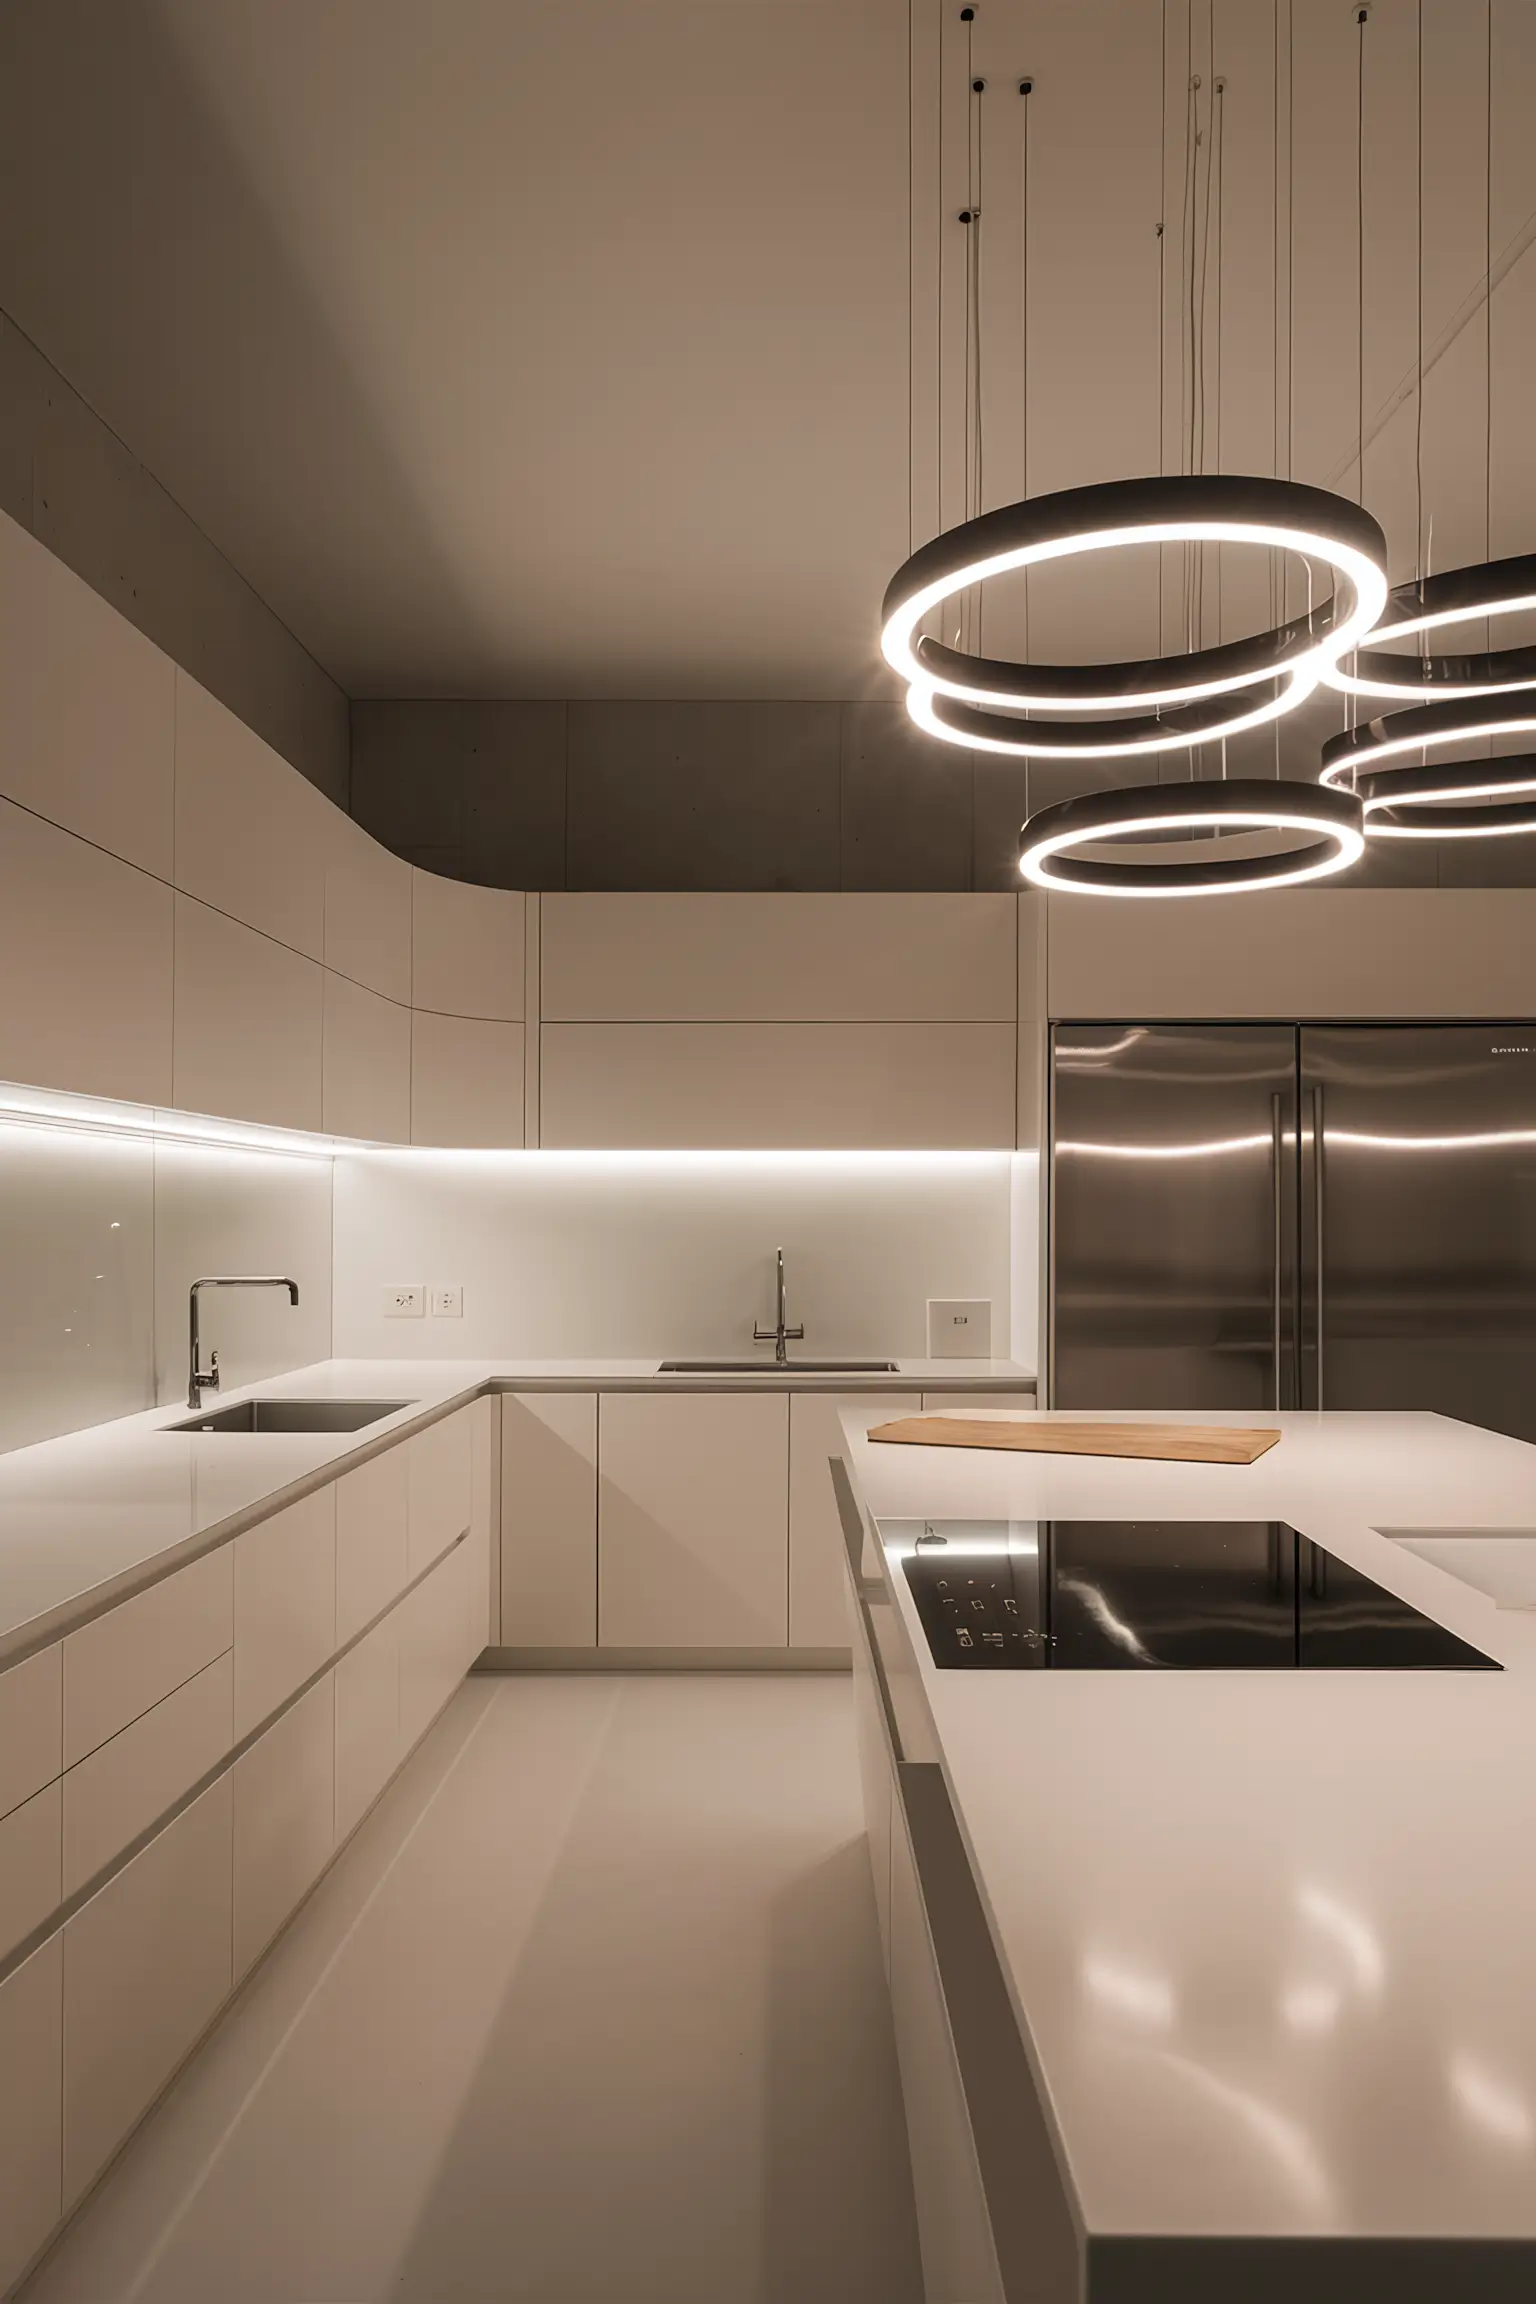 Minimalistic white kitchen with modern elements and high-tech appliances.